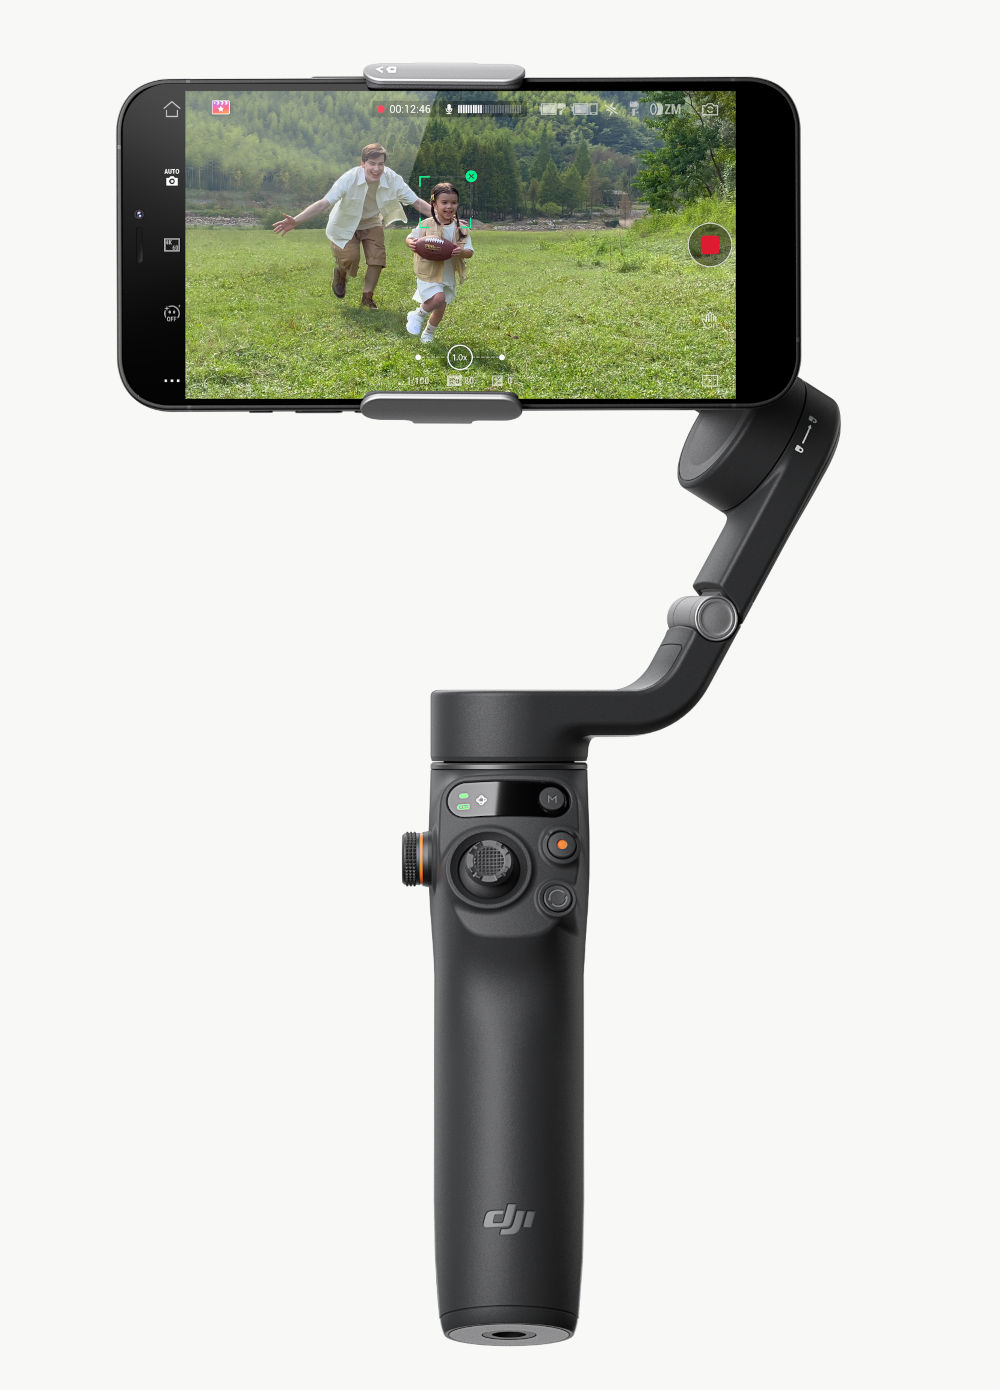 DJI Osmo Mobile 6: New smartphone gimbal with improved object tracking